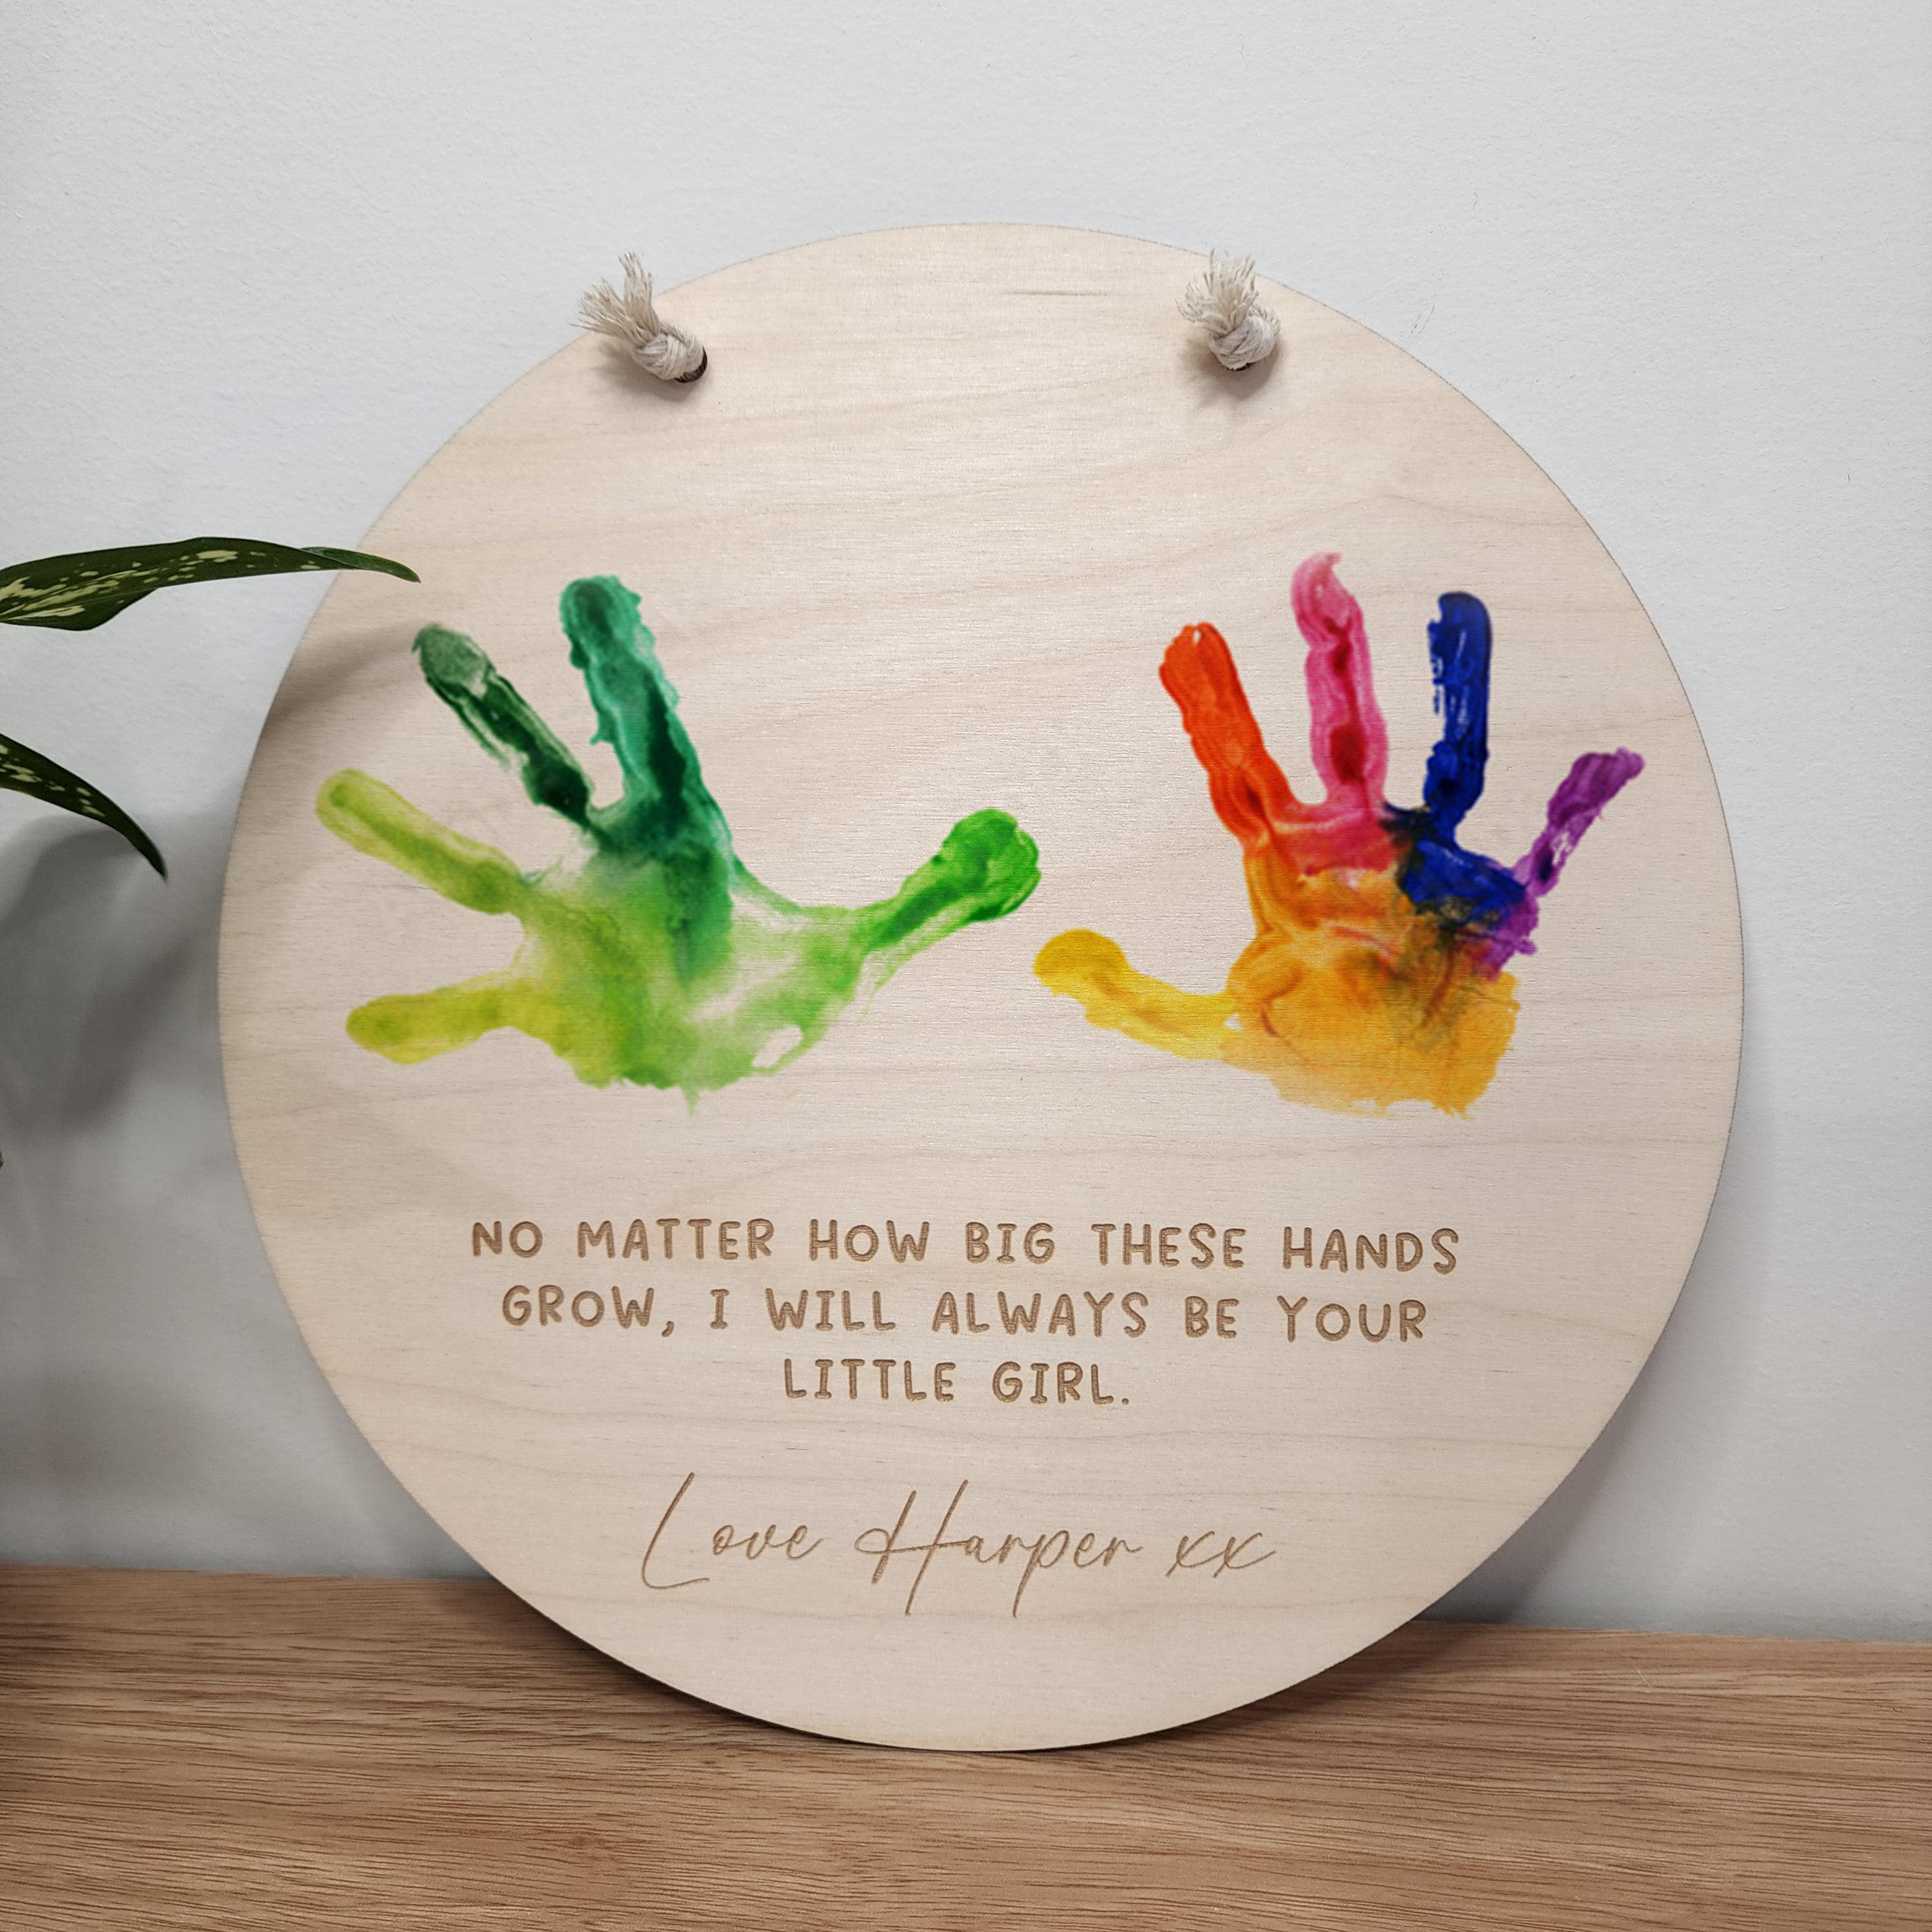 Dad Handprint Hanging Sign - Always Be - Personalised Wooden Round - Father's Day Gift - The Willow Corner